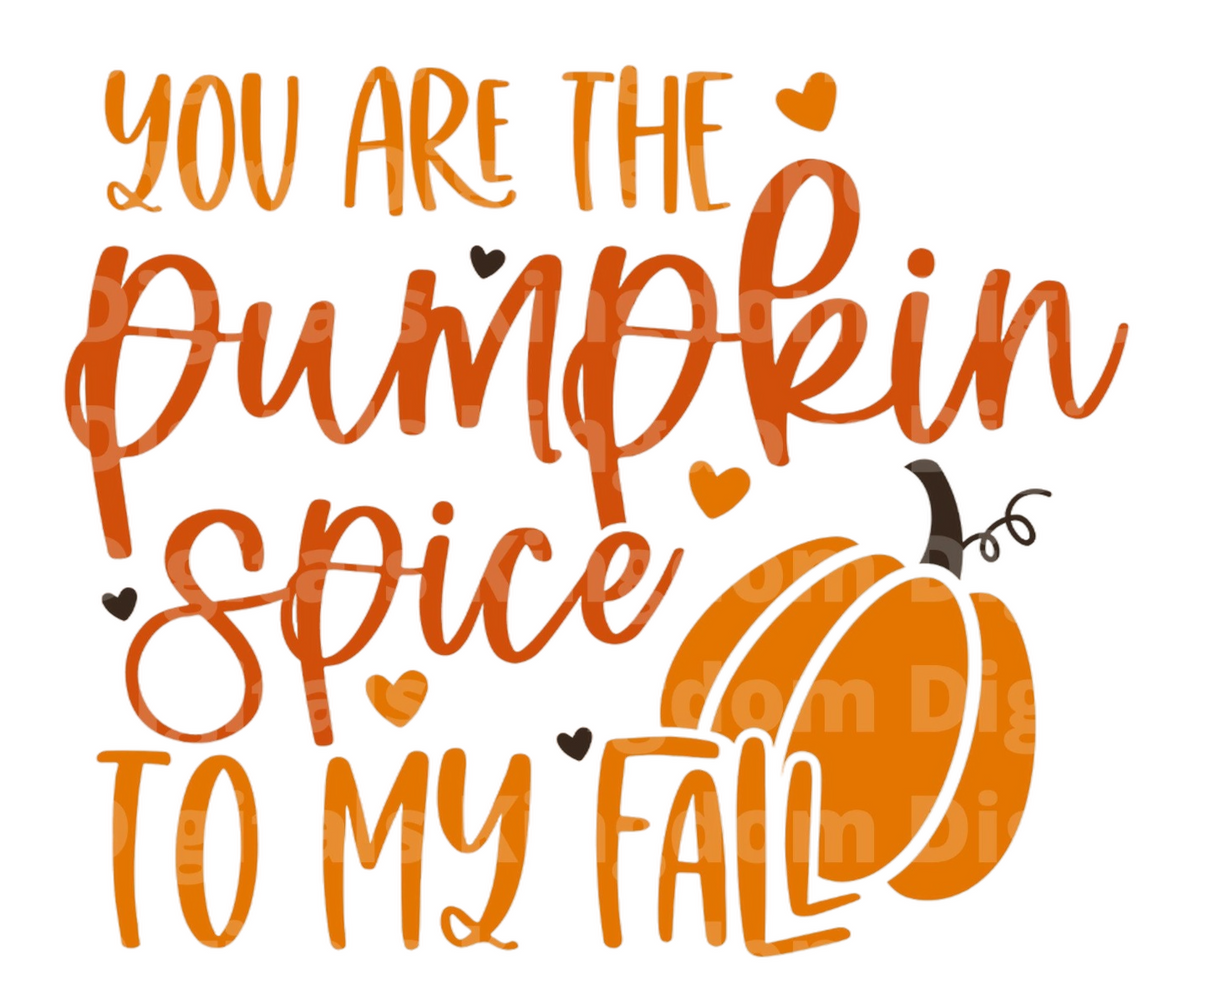 You are the pumpkin spice to my fall SVG Cut File